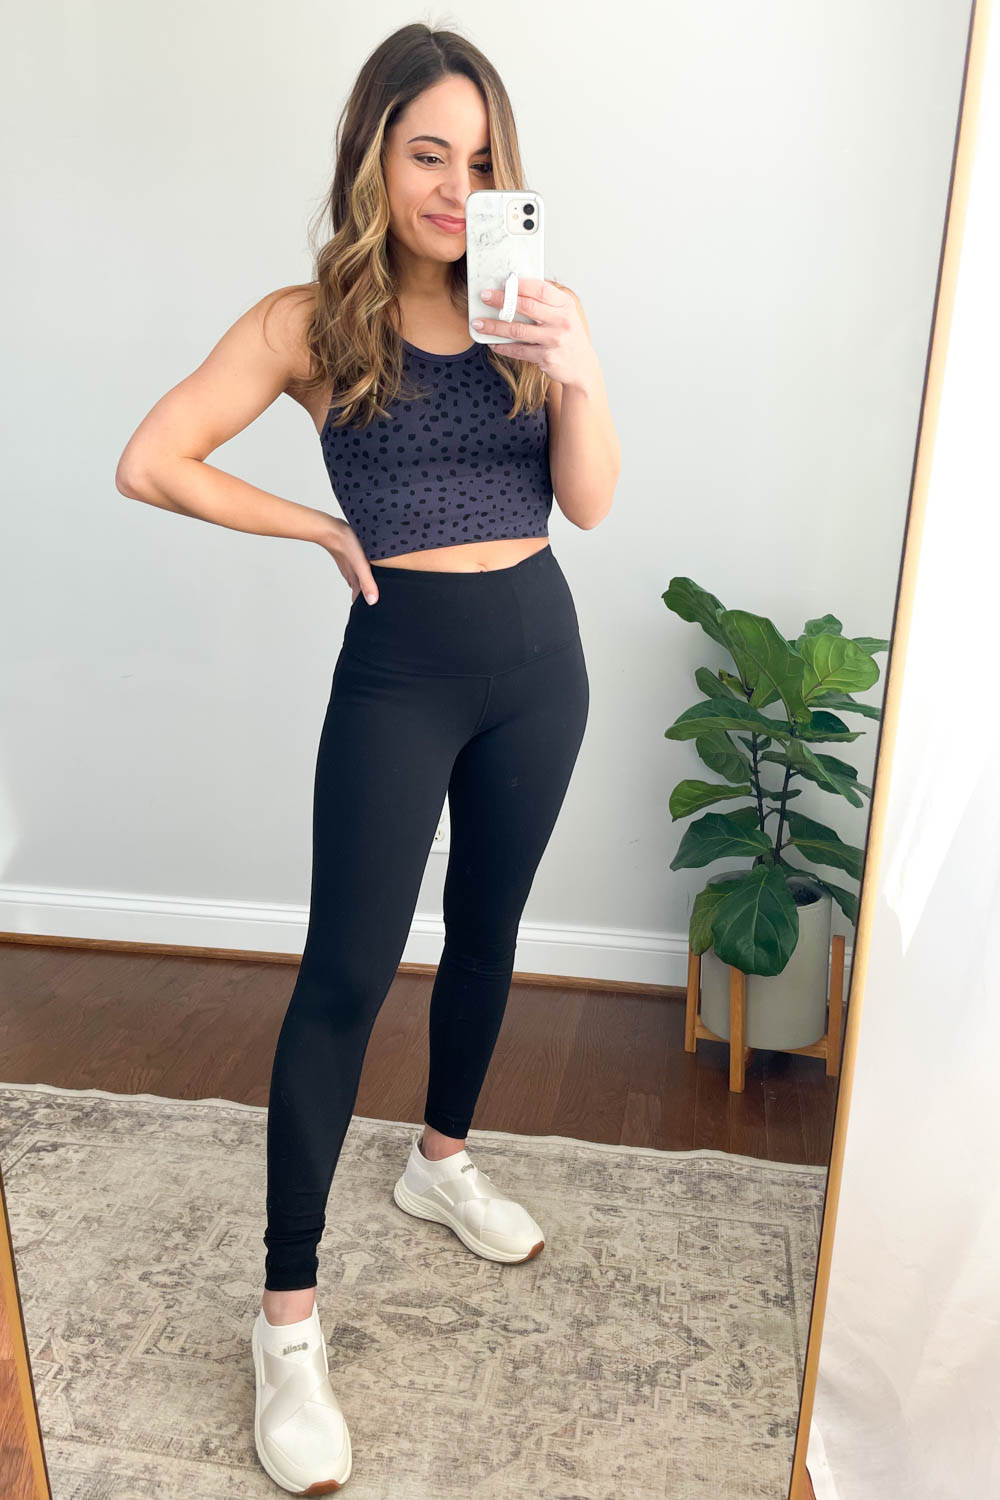 petite athleisure activewear, workout and yoga fitness apparel fashion